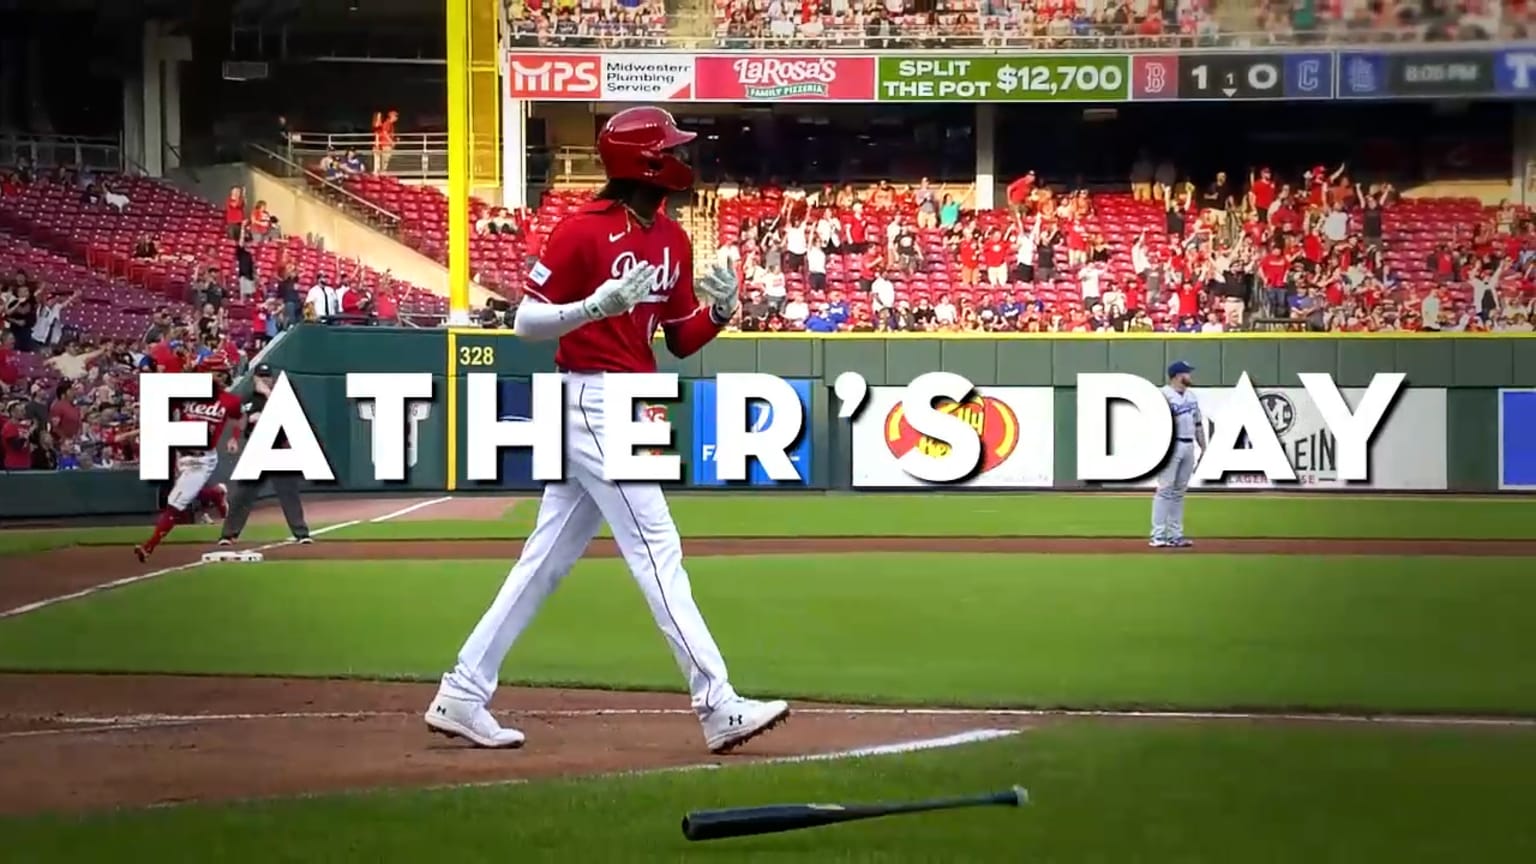 MLB.TV Subscription Free Trial, Deals 2023: 50% Off Father's Day Sale